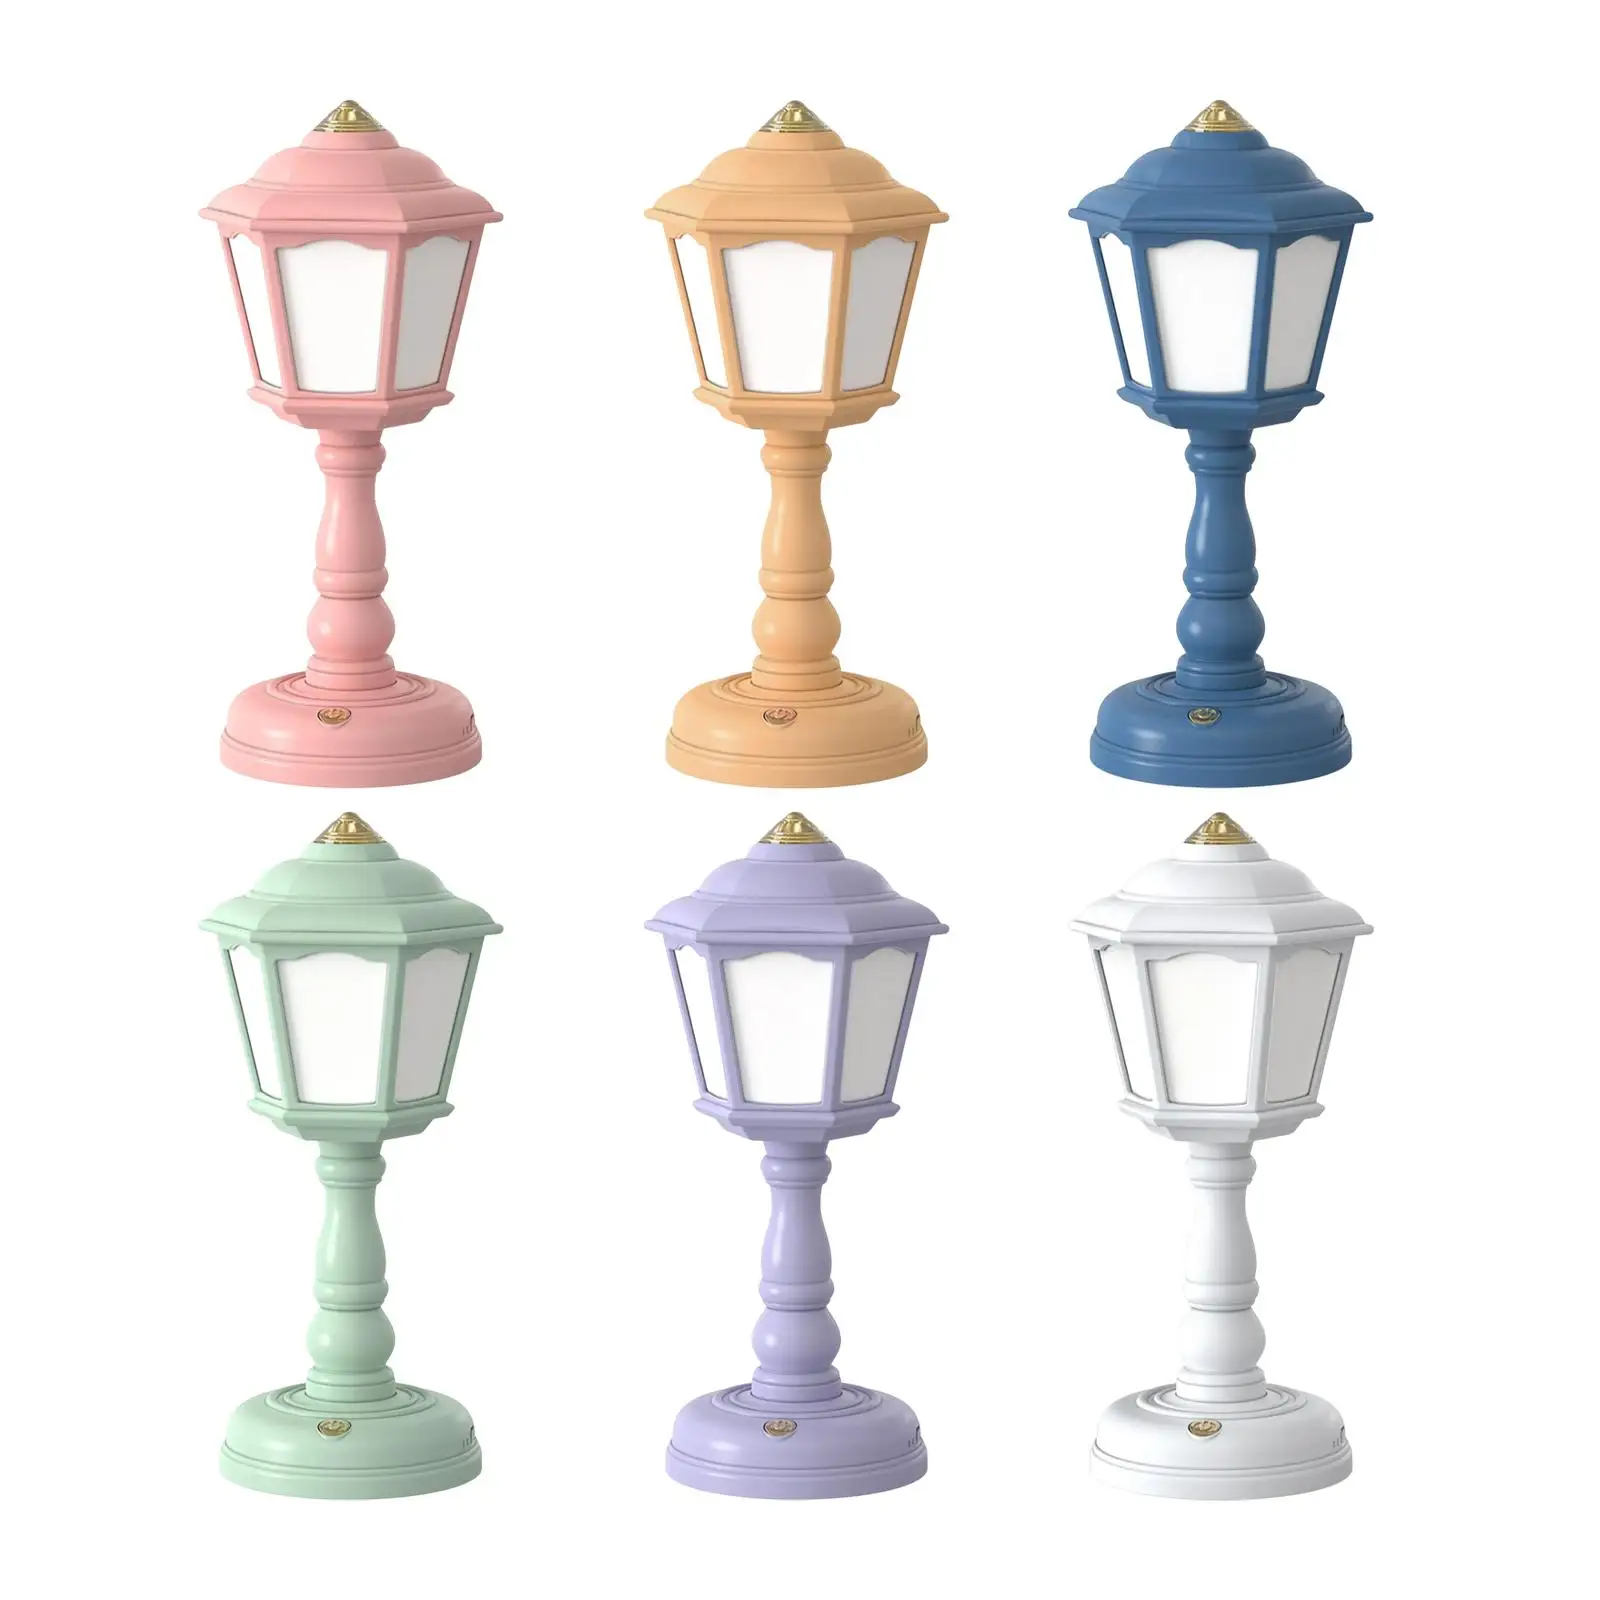 Mini Retro Table Lamp Battery Operated European Style Dimmable for Bedroom